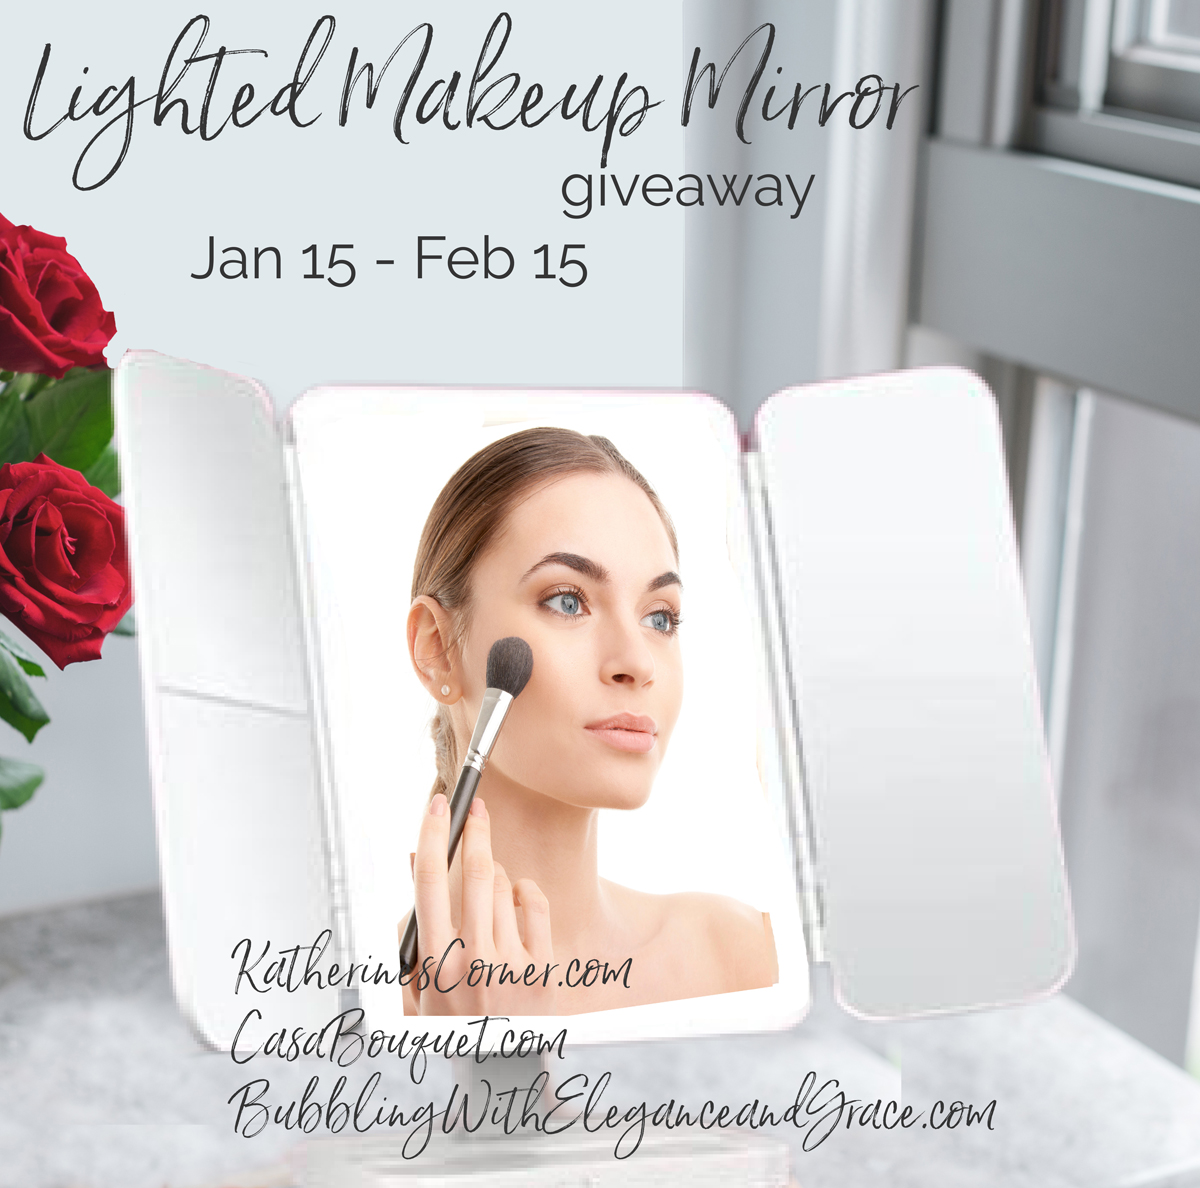 Lighted Makeup Mirror Giveaway